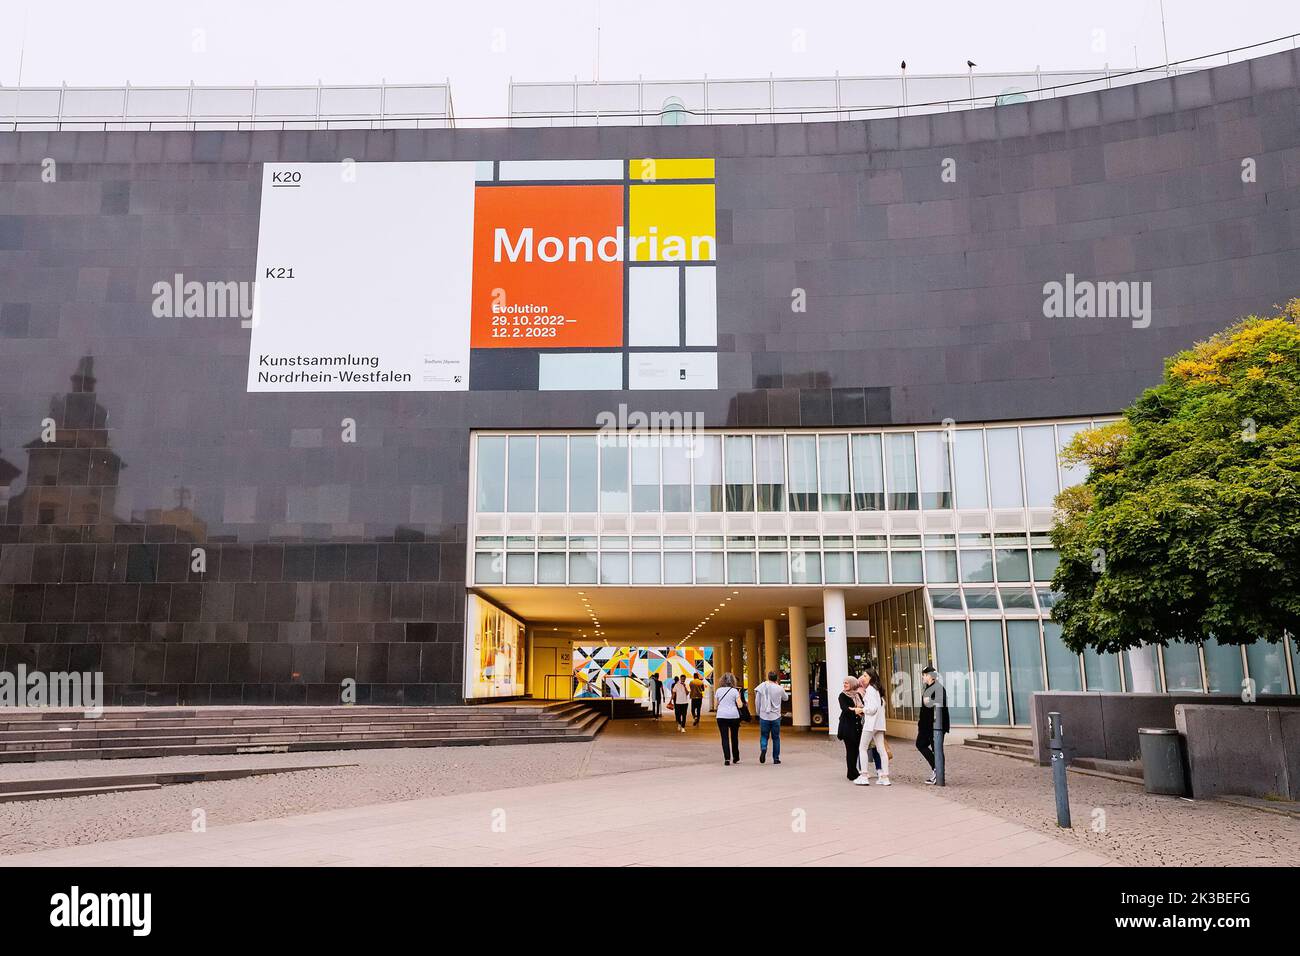 22 July 2022, Dusseldorf, Germany: Facade of a K20 contemporary art museum. Modern and cultural exposition and gallery Stock Photo